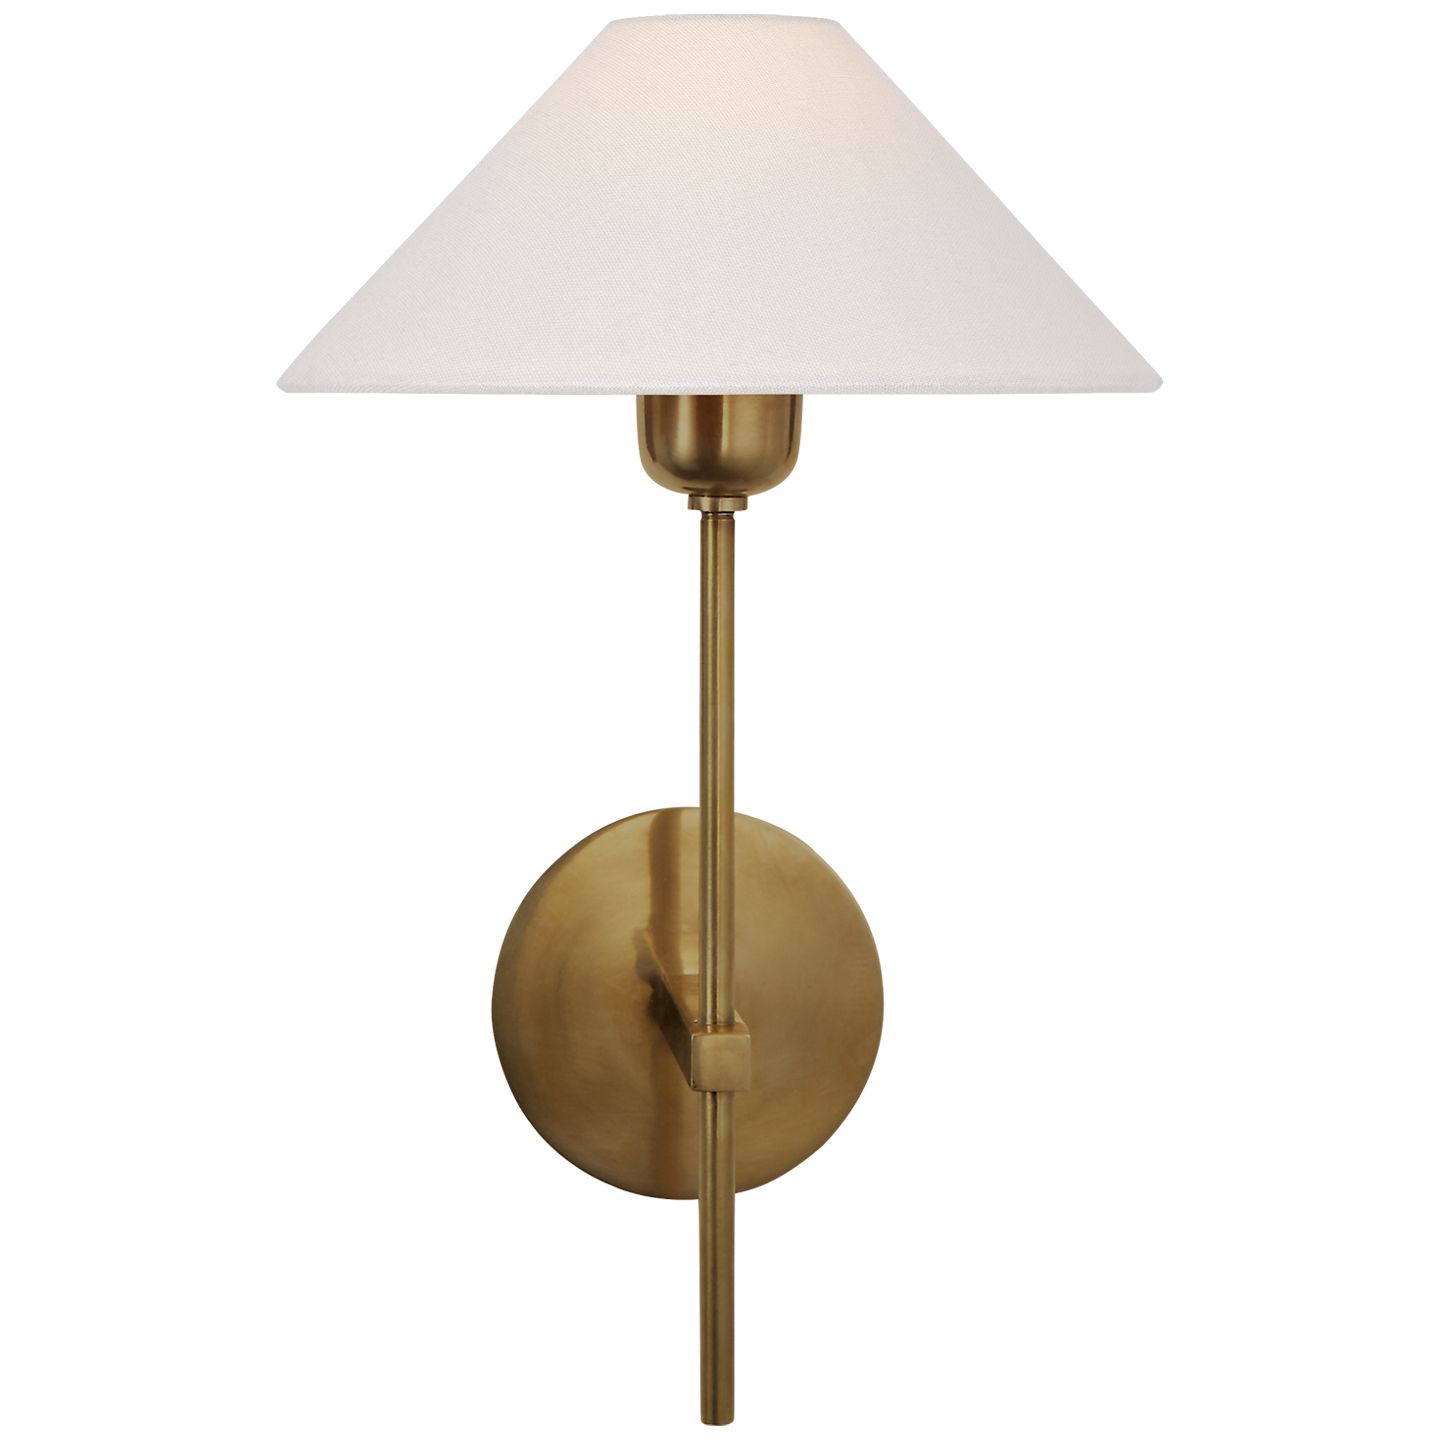 Hackney Single Sconce in Hand-Rubbed Antique Brass with Linen Shade | Visual Comfort